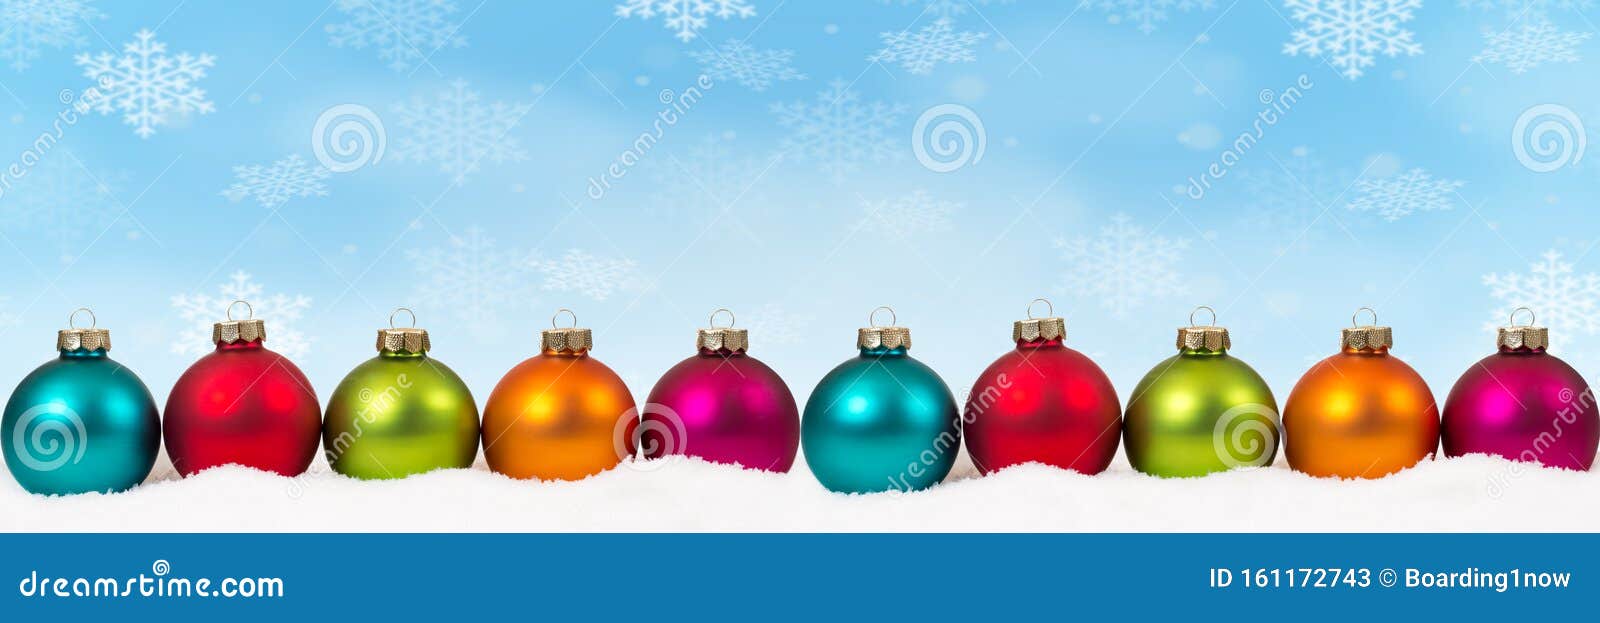 Christmas Balls Baubles Background Decoration Banner Snowflakes Snow ...